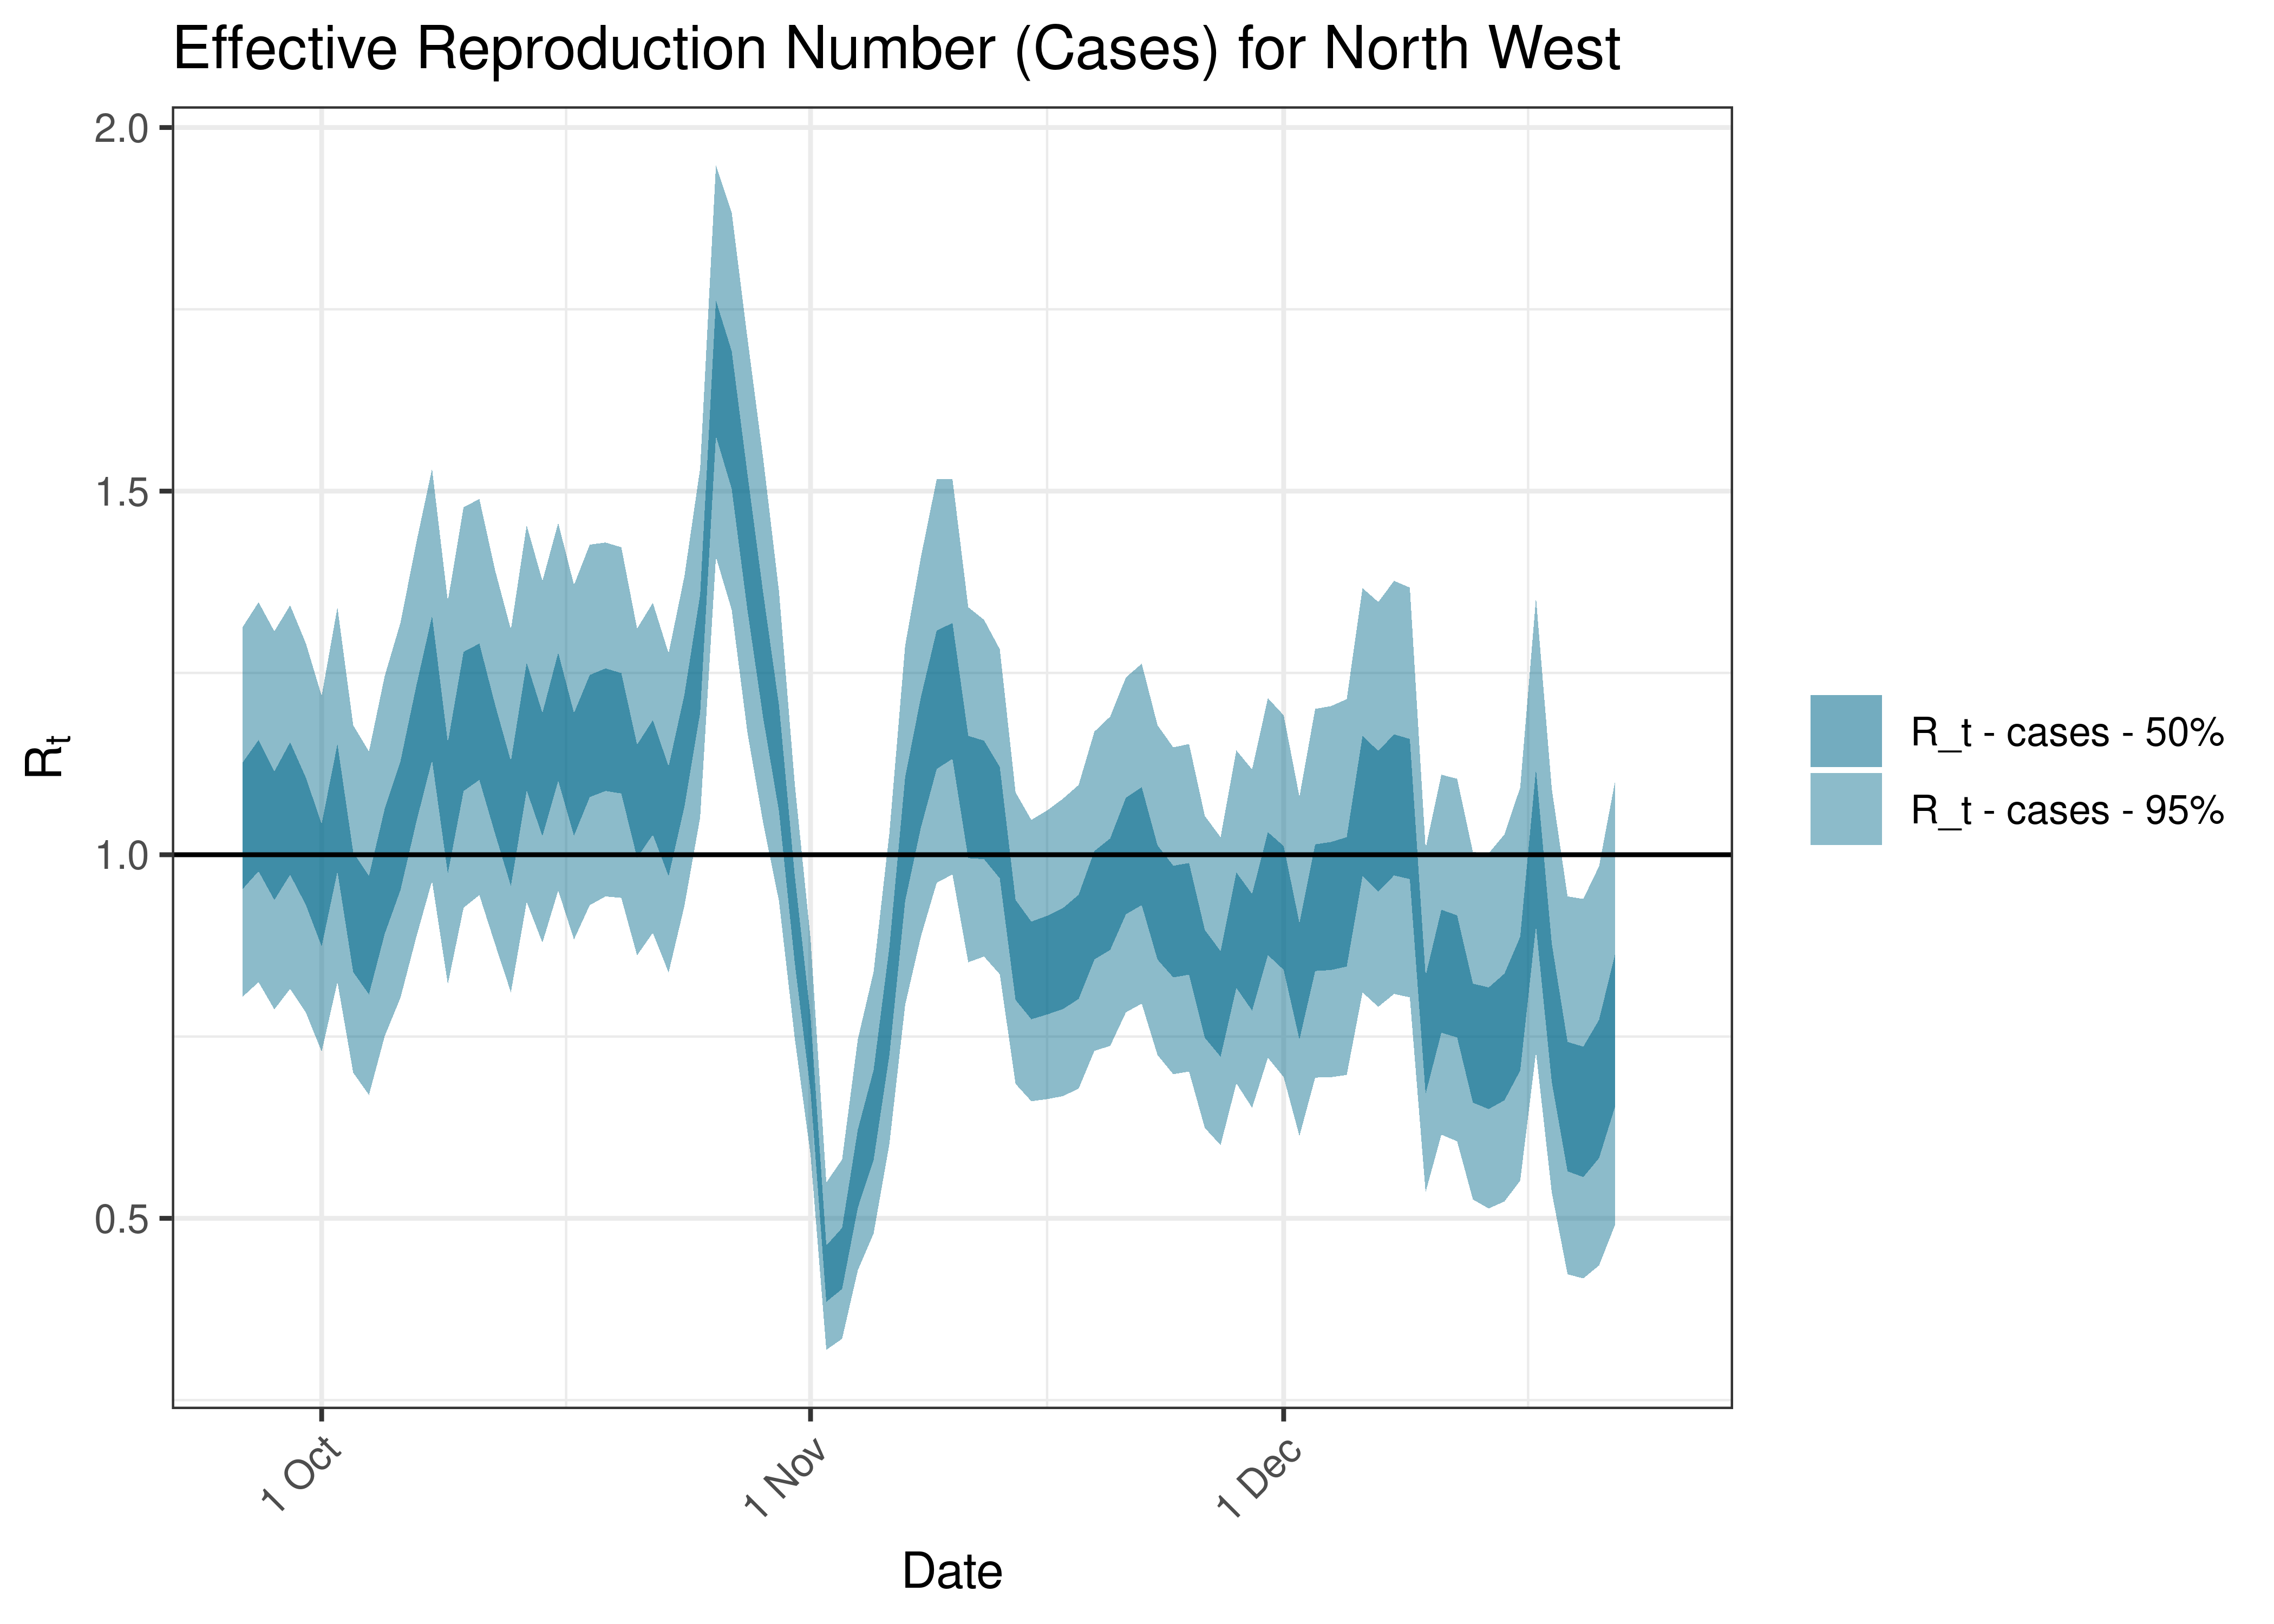 Estimated Effective Reproduction Number Based on Cases for North West over last 90 days